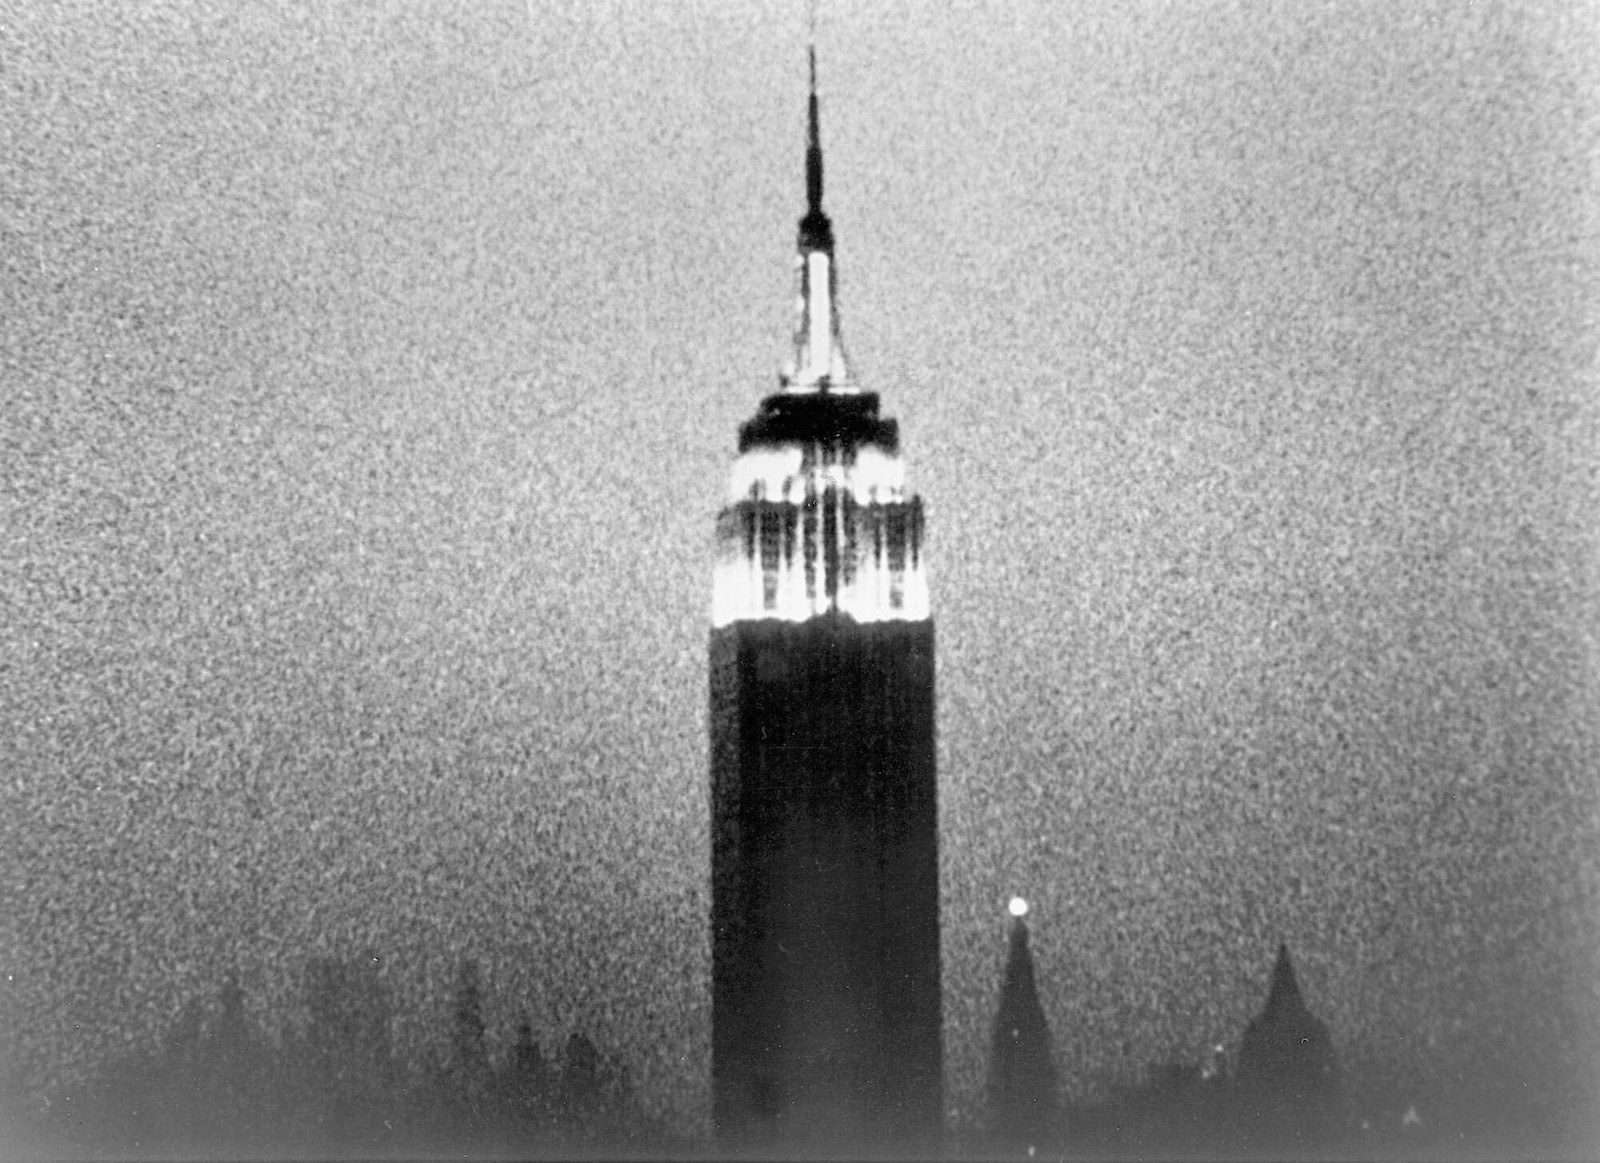 A still from a grainy black-and-white film of the Empire state building